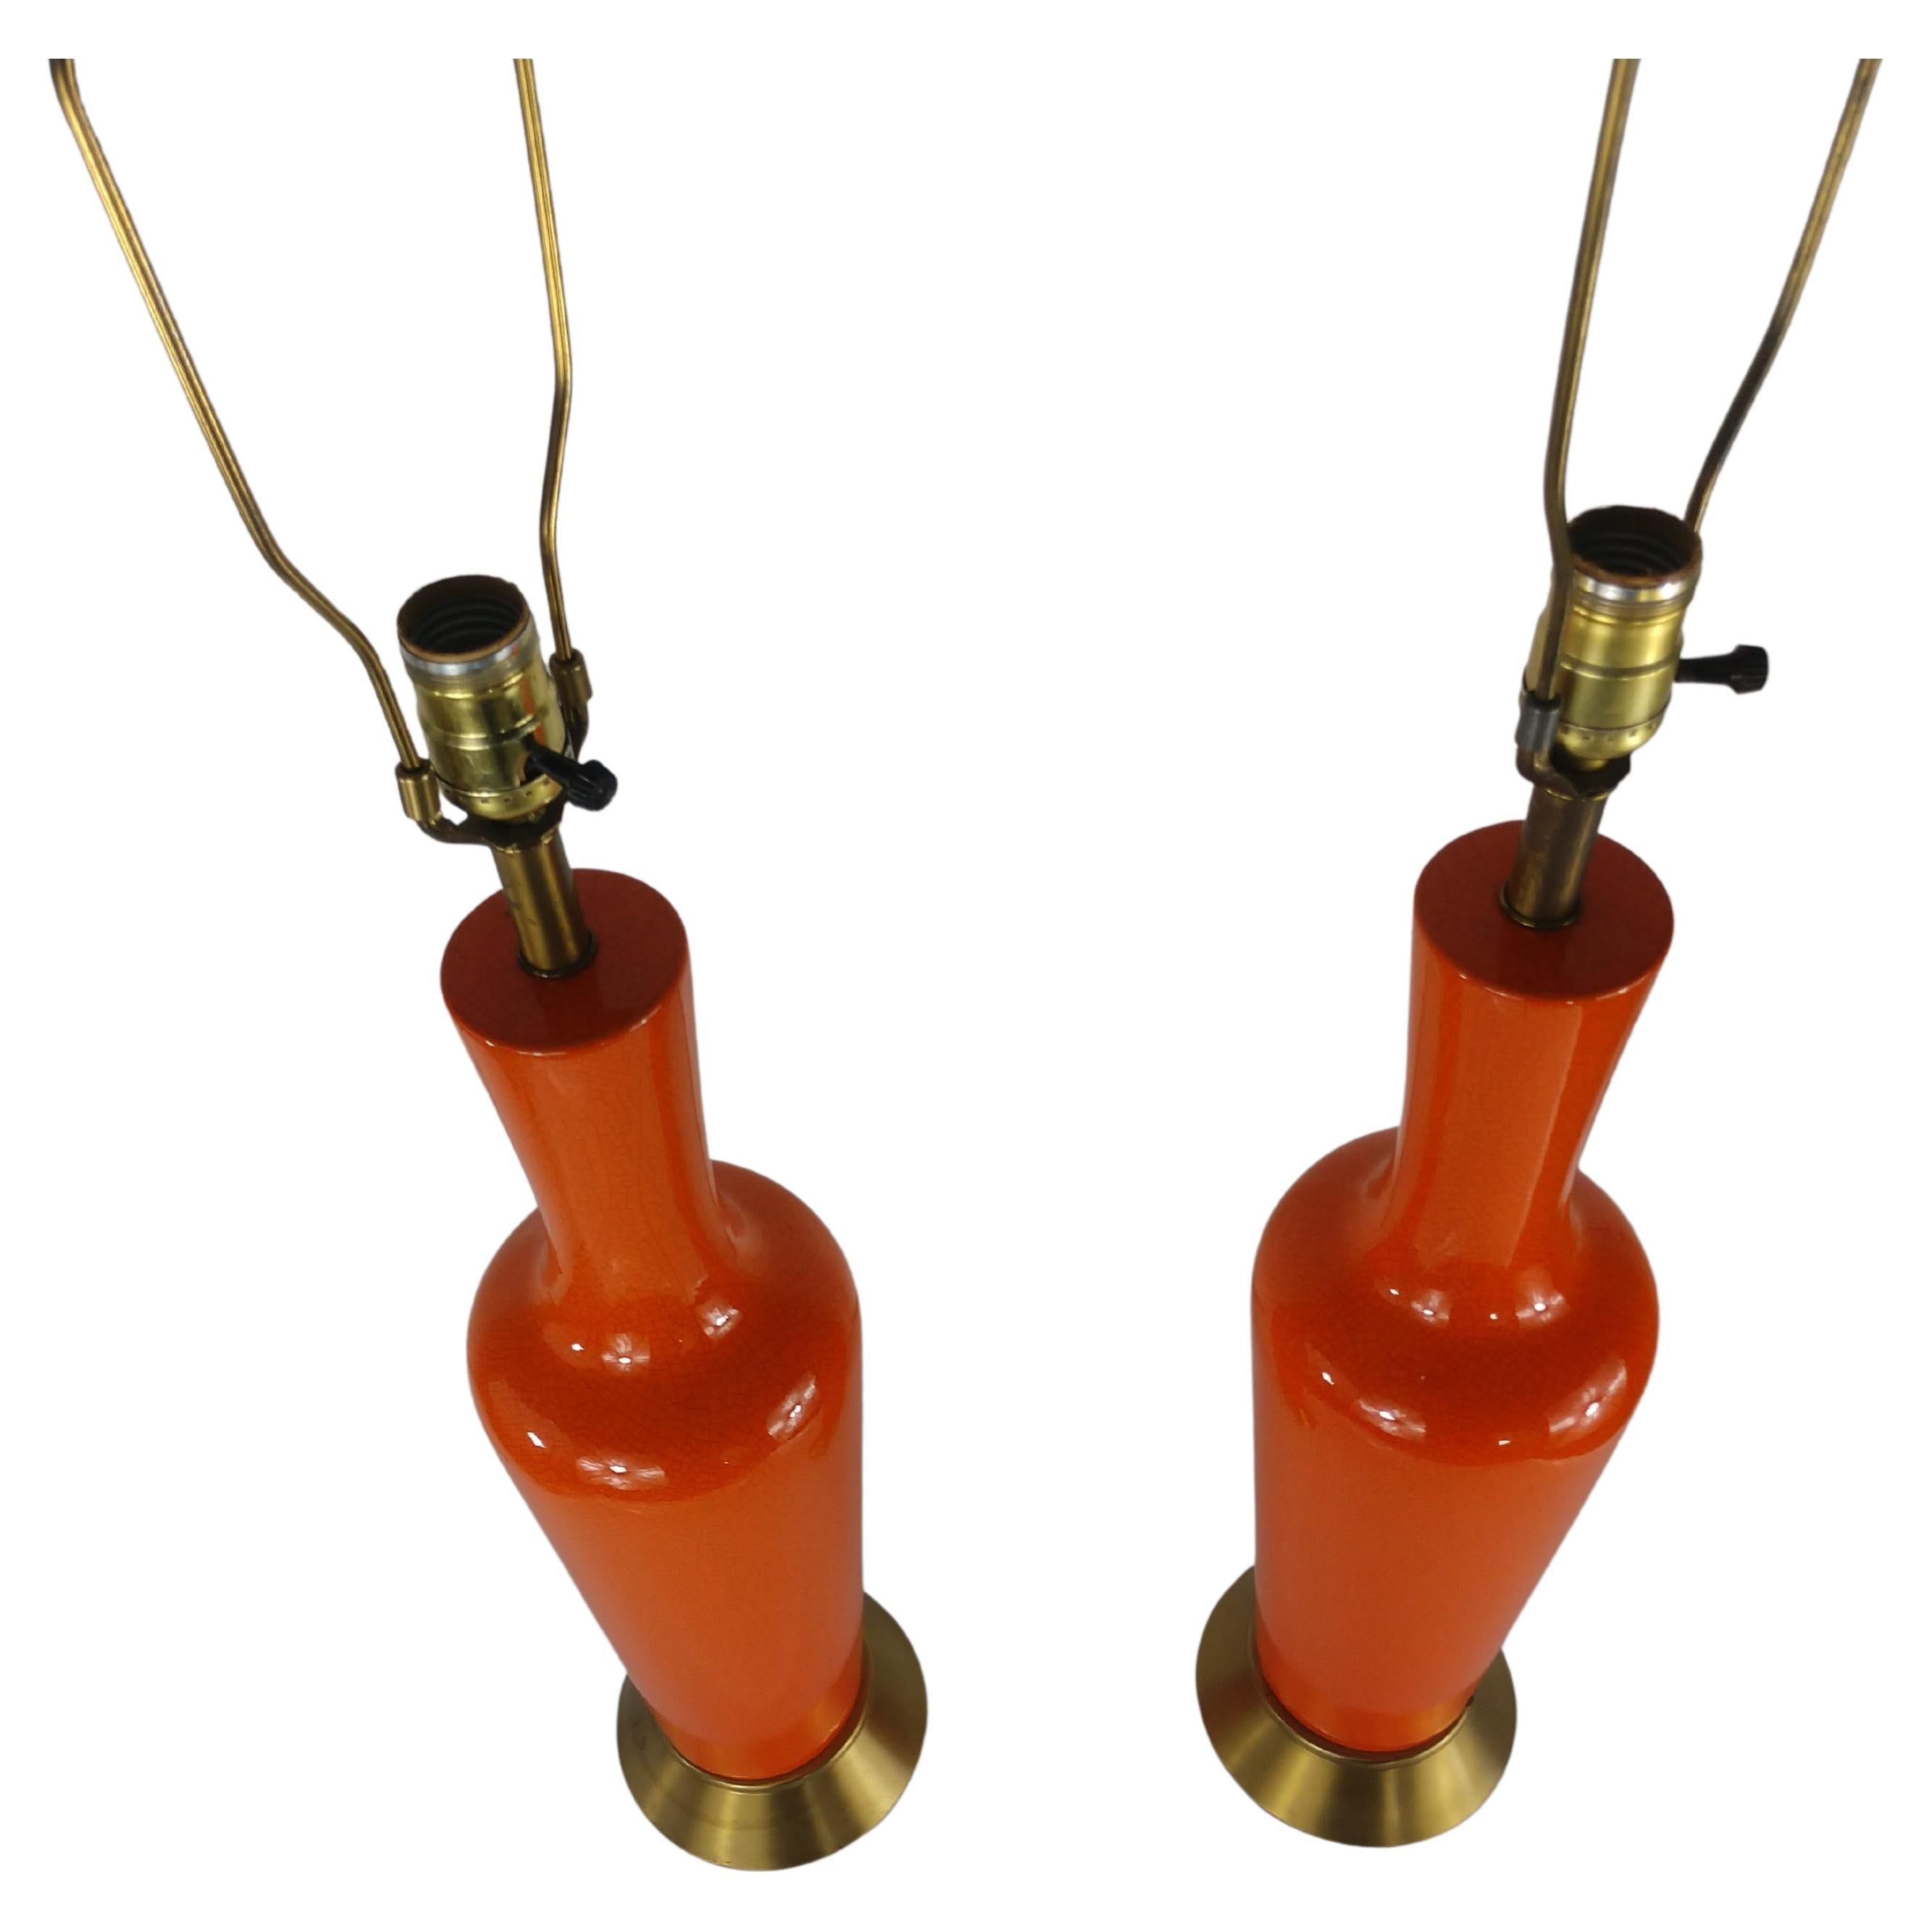 Pair of Mid-Century Modern Table Lamps with Orange Crackle Glaze, C1958 In Good Condition For Sale In Port Jervis, NY